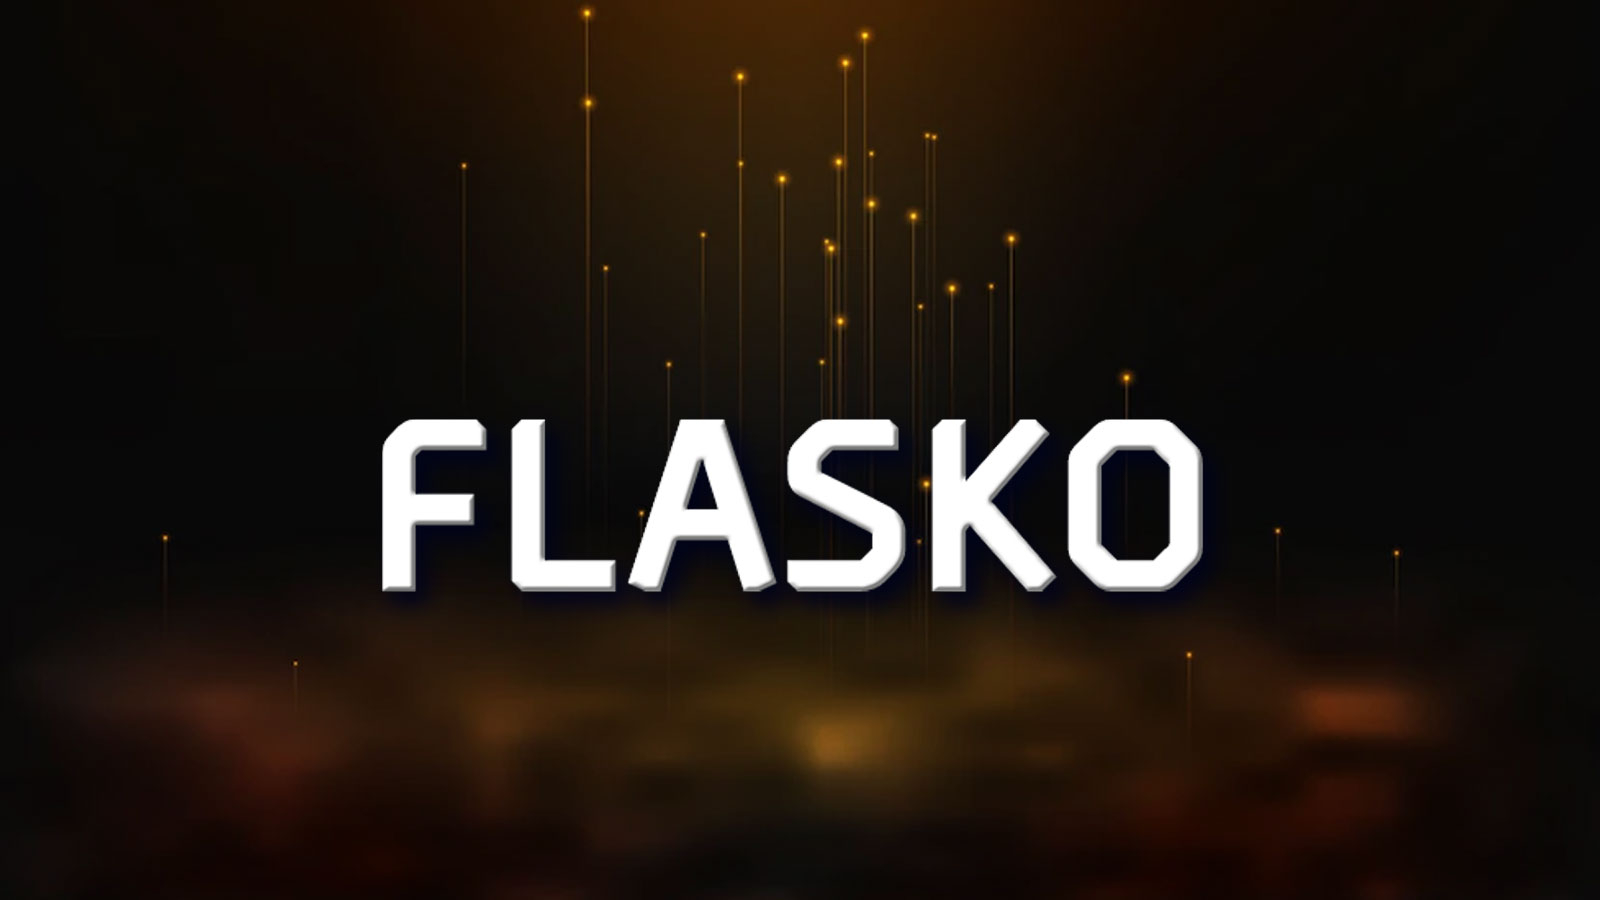 Flasko (FLSK) Presale Sells Last Portion of Coins, Tries to Increase Visibility among Monero (XMR), Helium (HNT) Communities